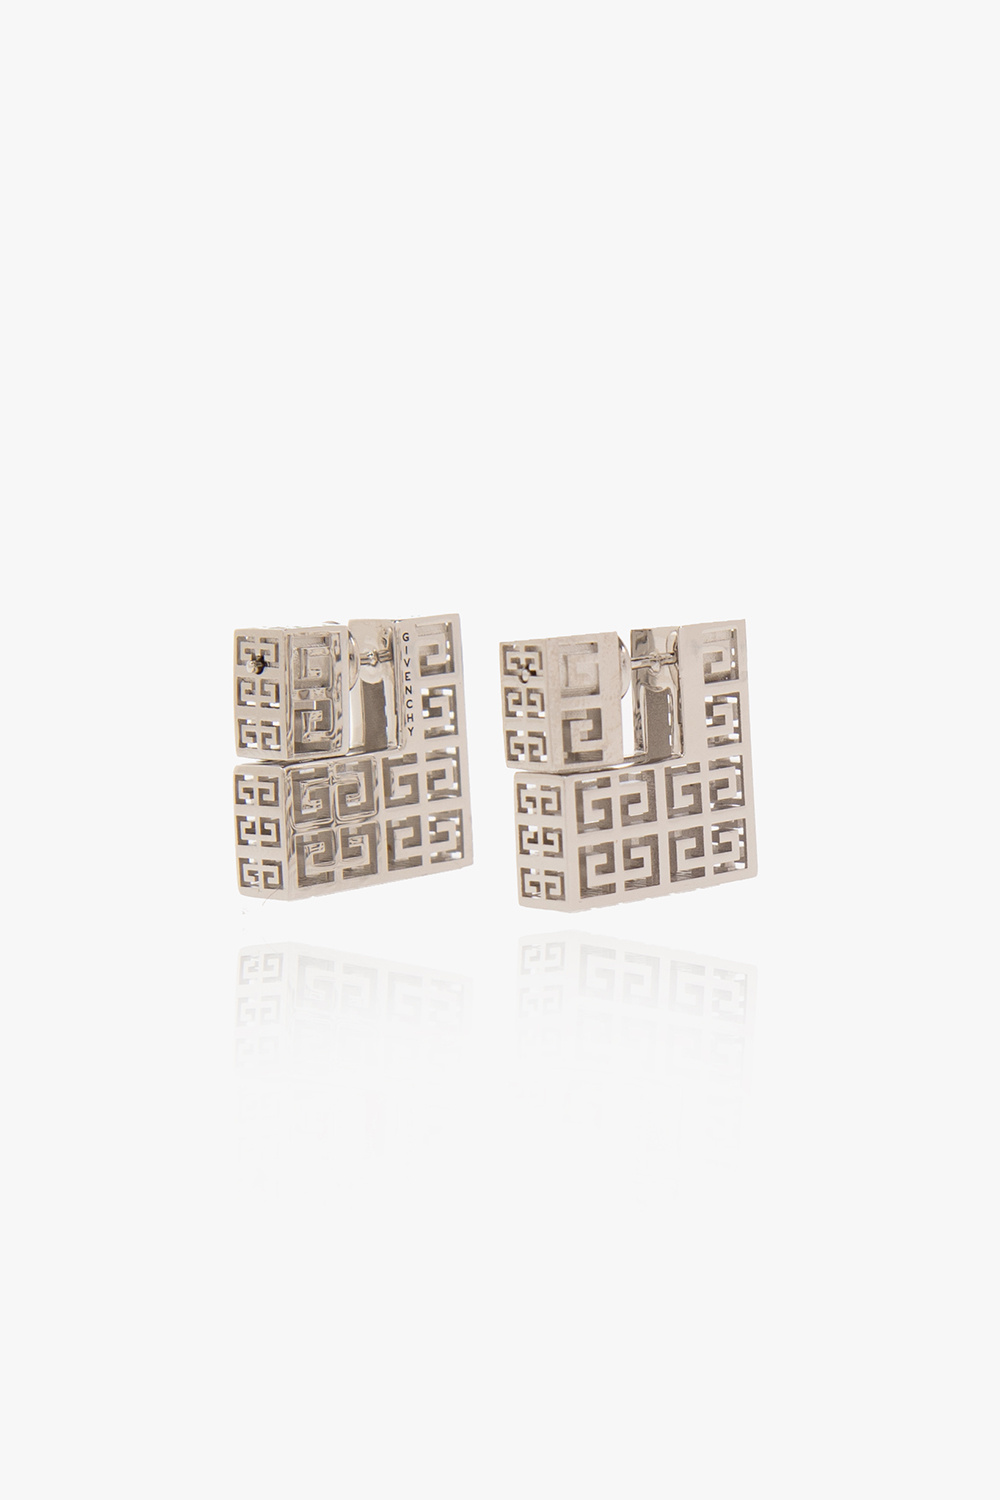 givenchy print ‘G Square’ earrings